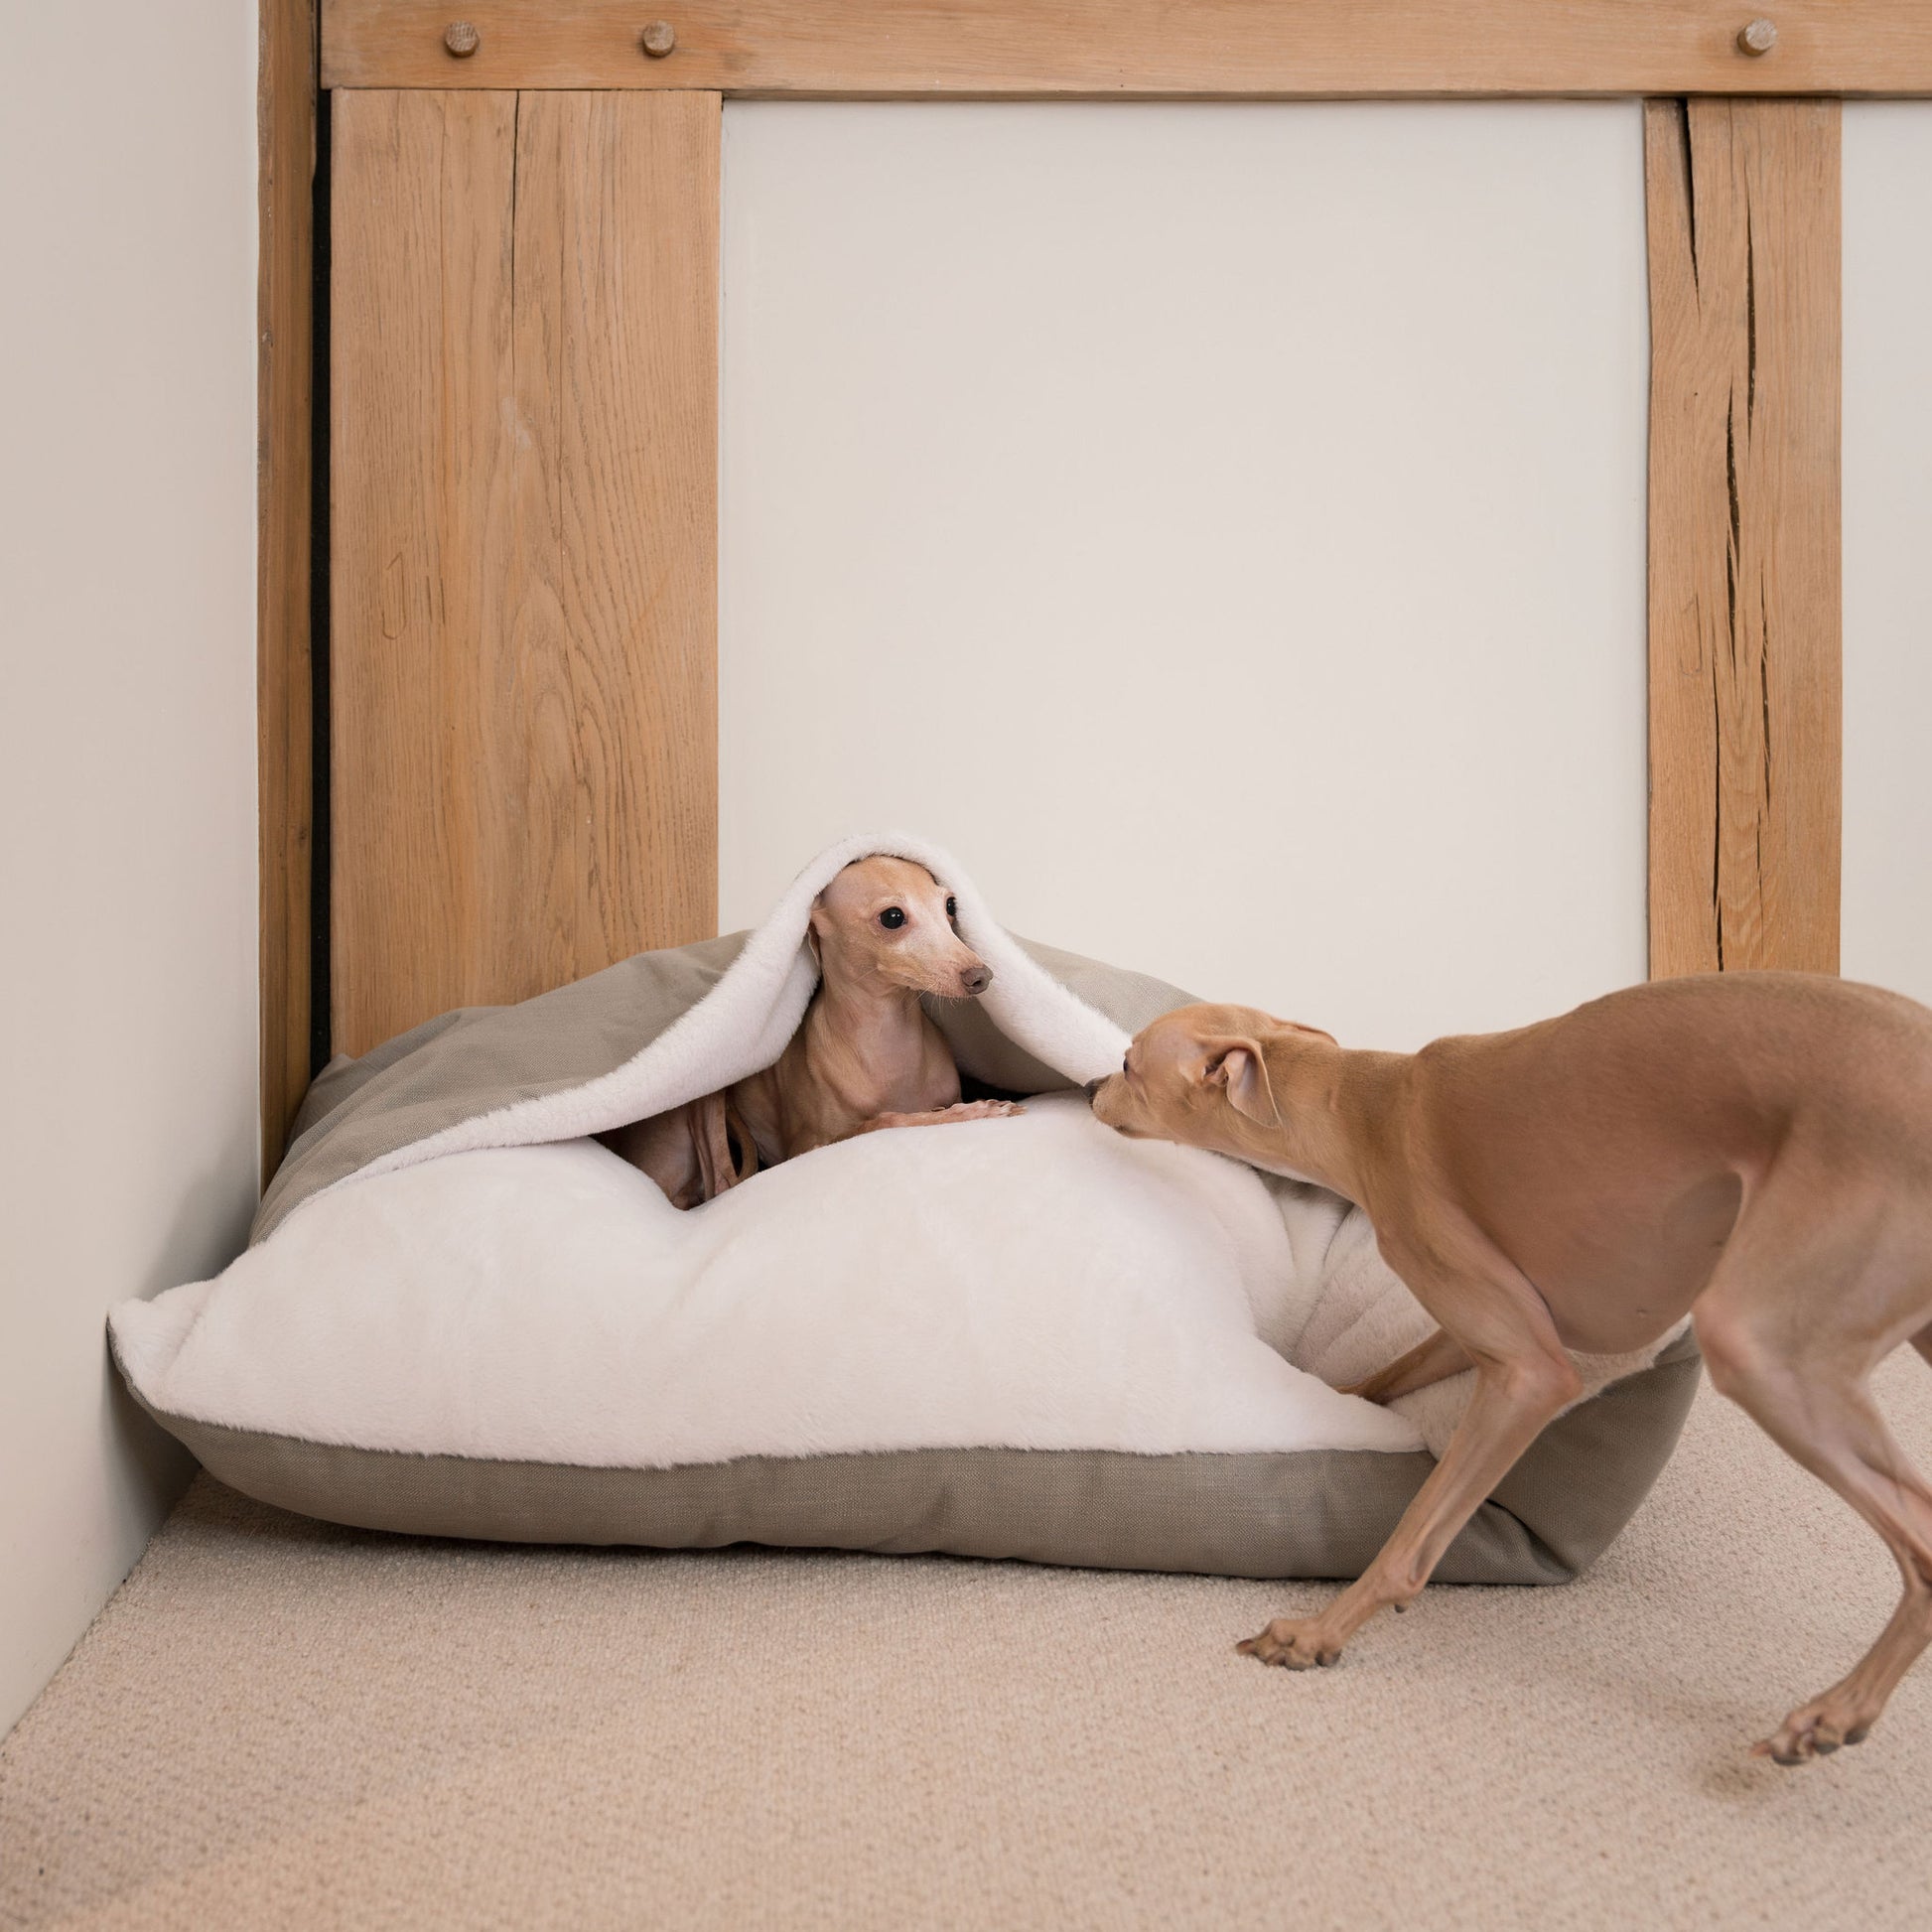 Luxury Savanna Sleepy Burrow, The Perfect bed For a Pet to Burrow. Available To Personalise In Stunning Savanna Stone, Here at Lords & Labradors